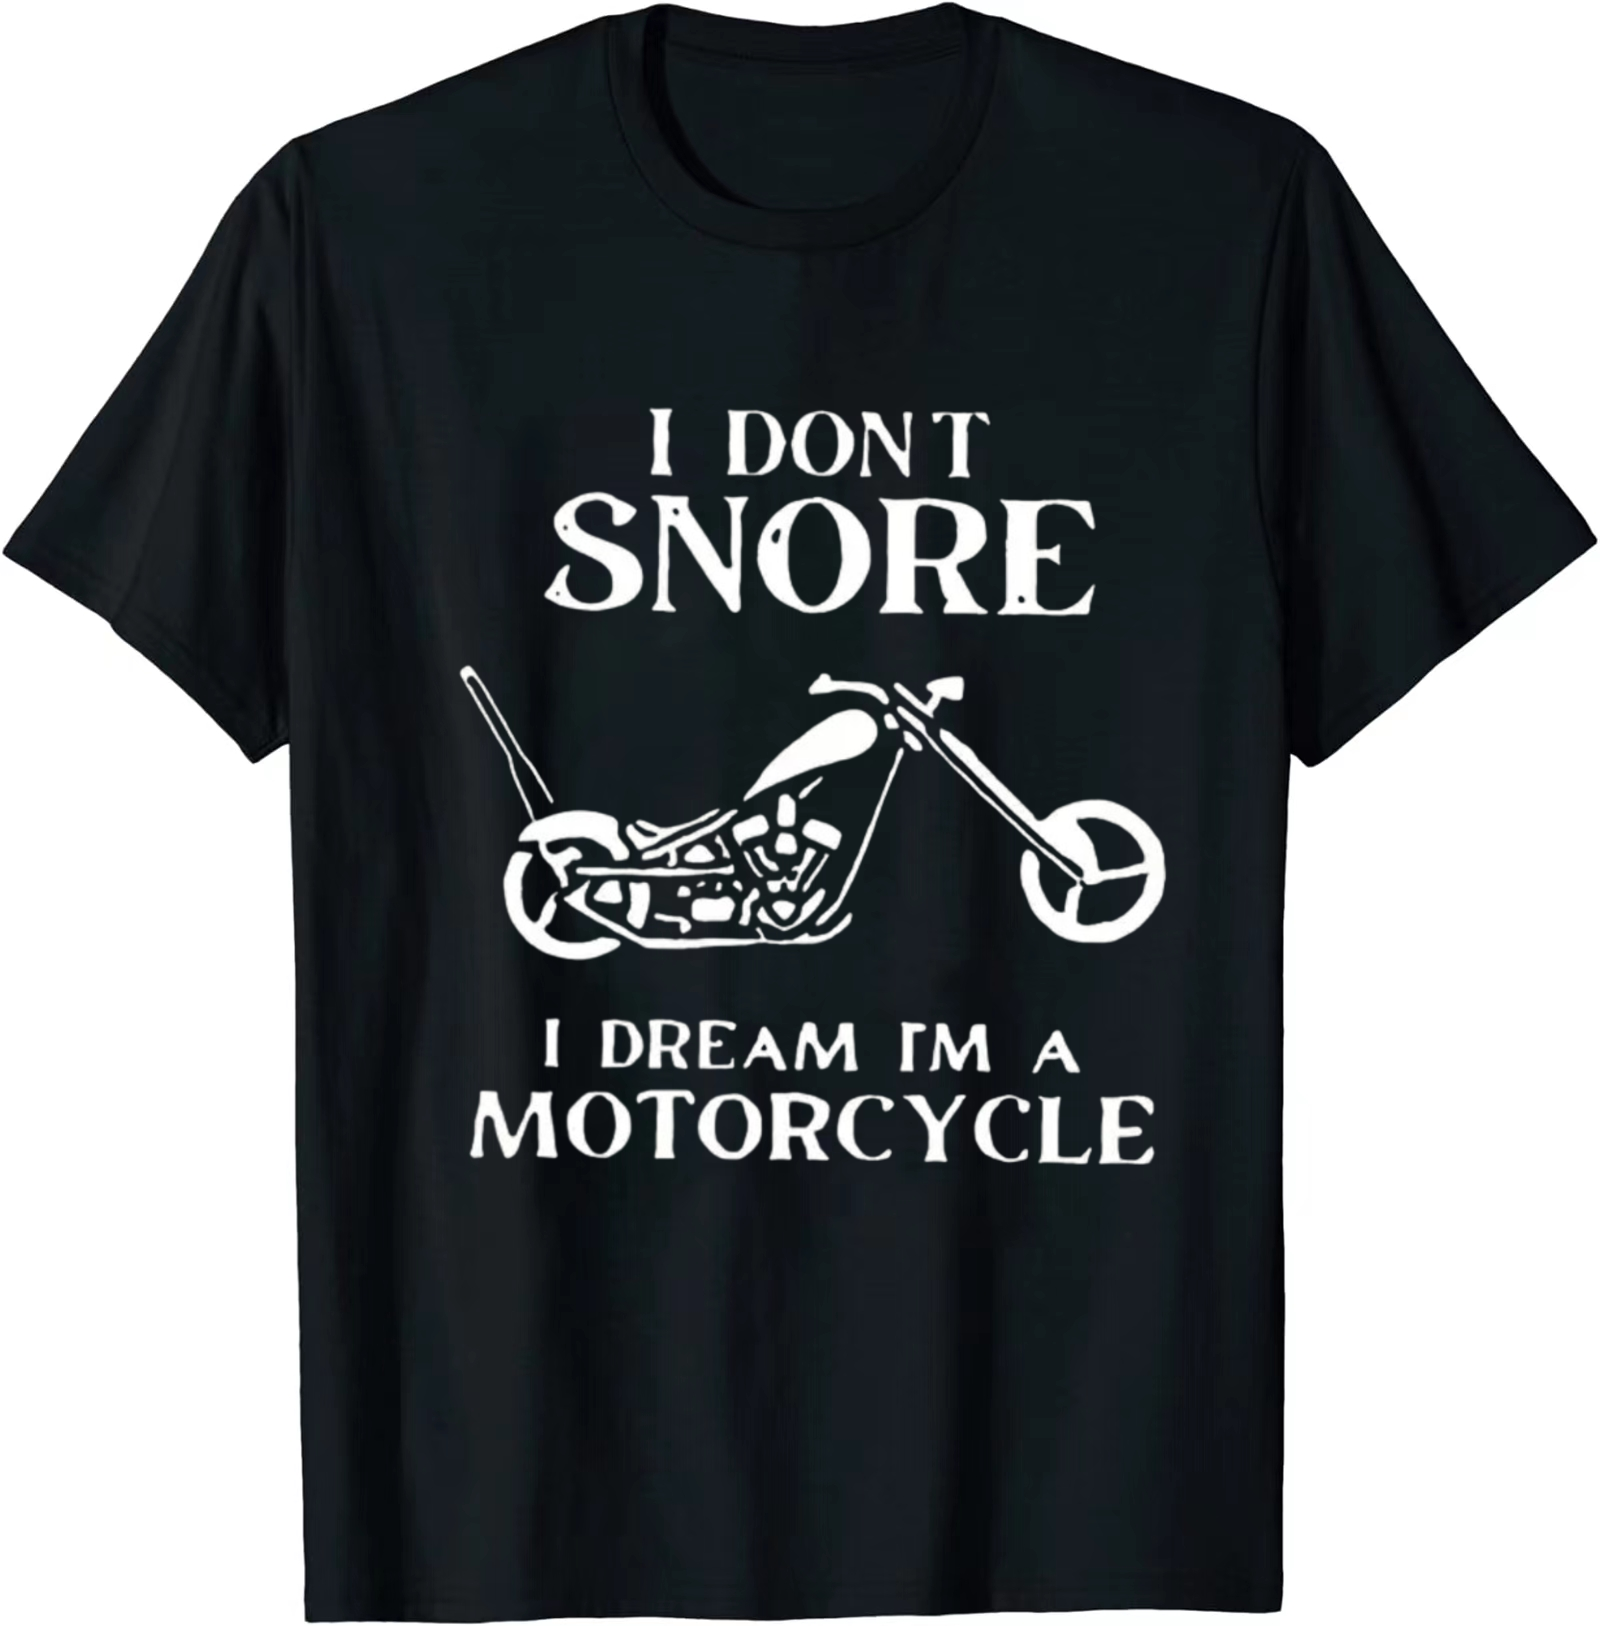 Motorcycle Print, Men's Graphic T-shirt, Casual Loose Tees For Summer ...